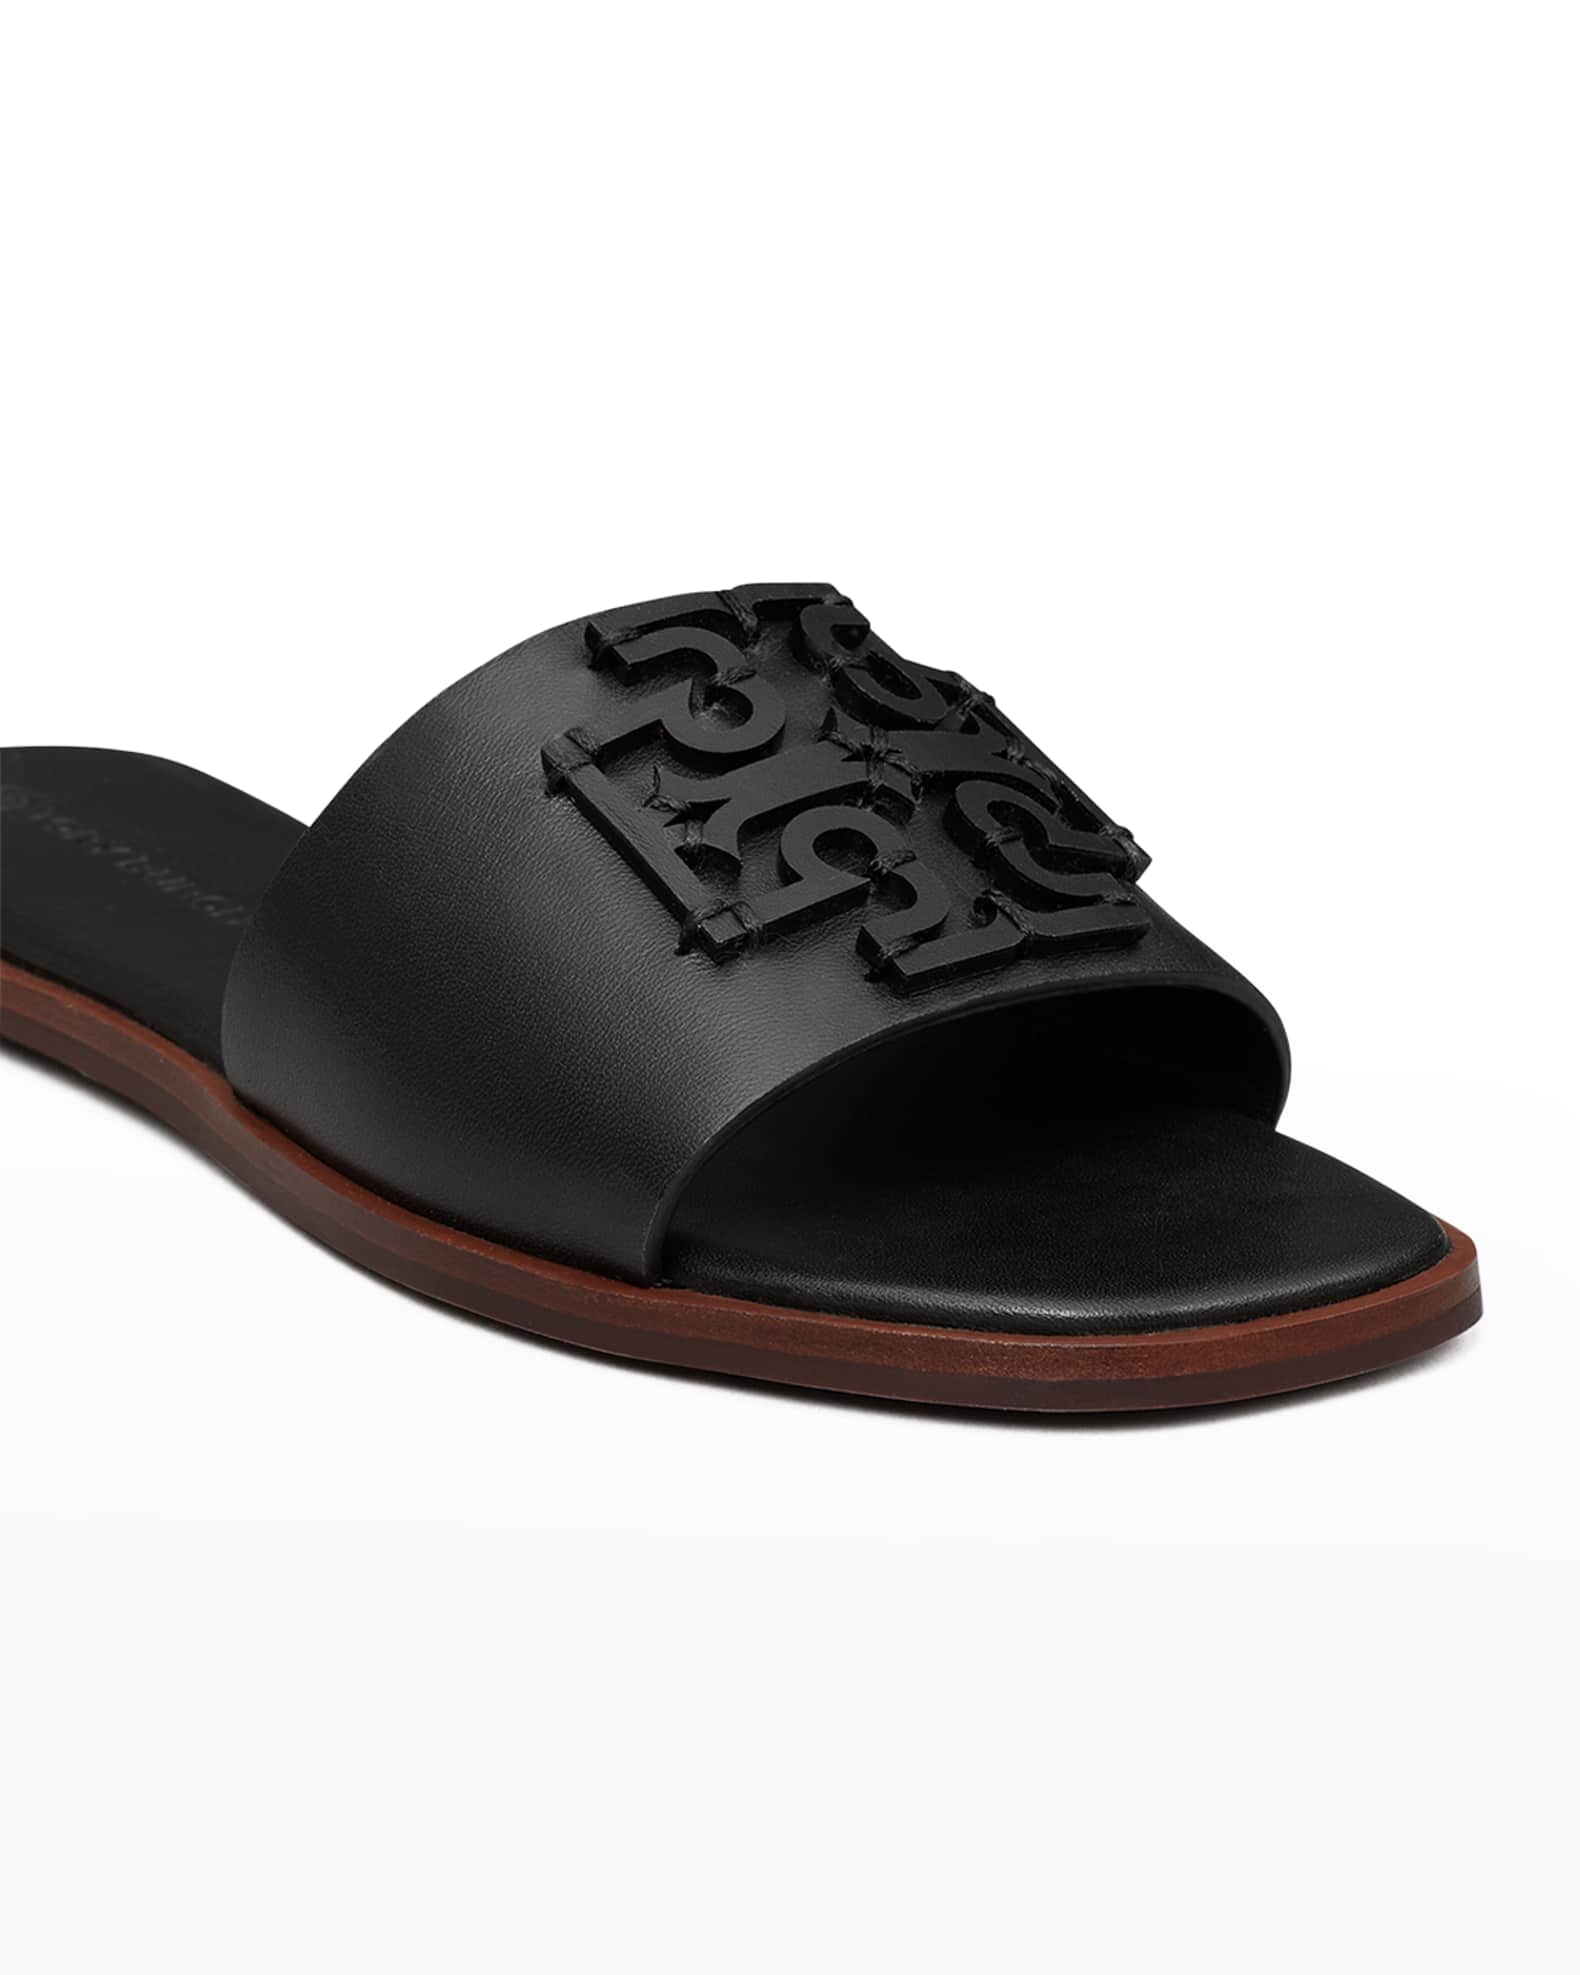 Tory Burch Ines Leather Medallion Sandals | Neiman Marcus